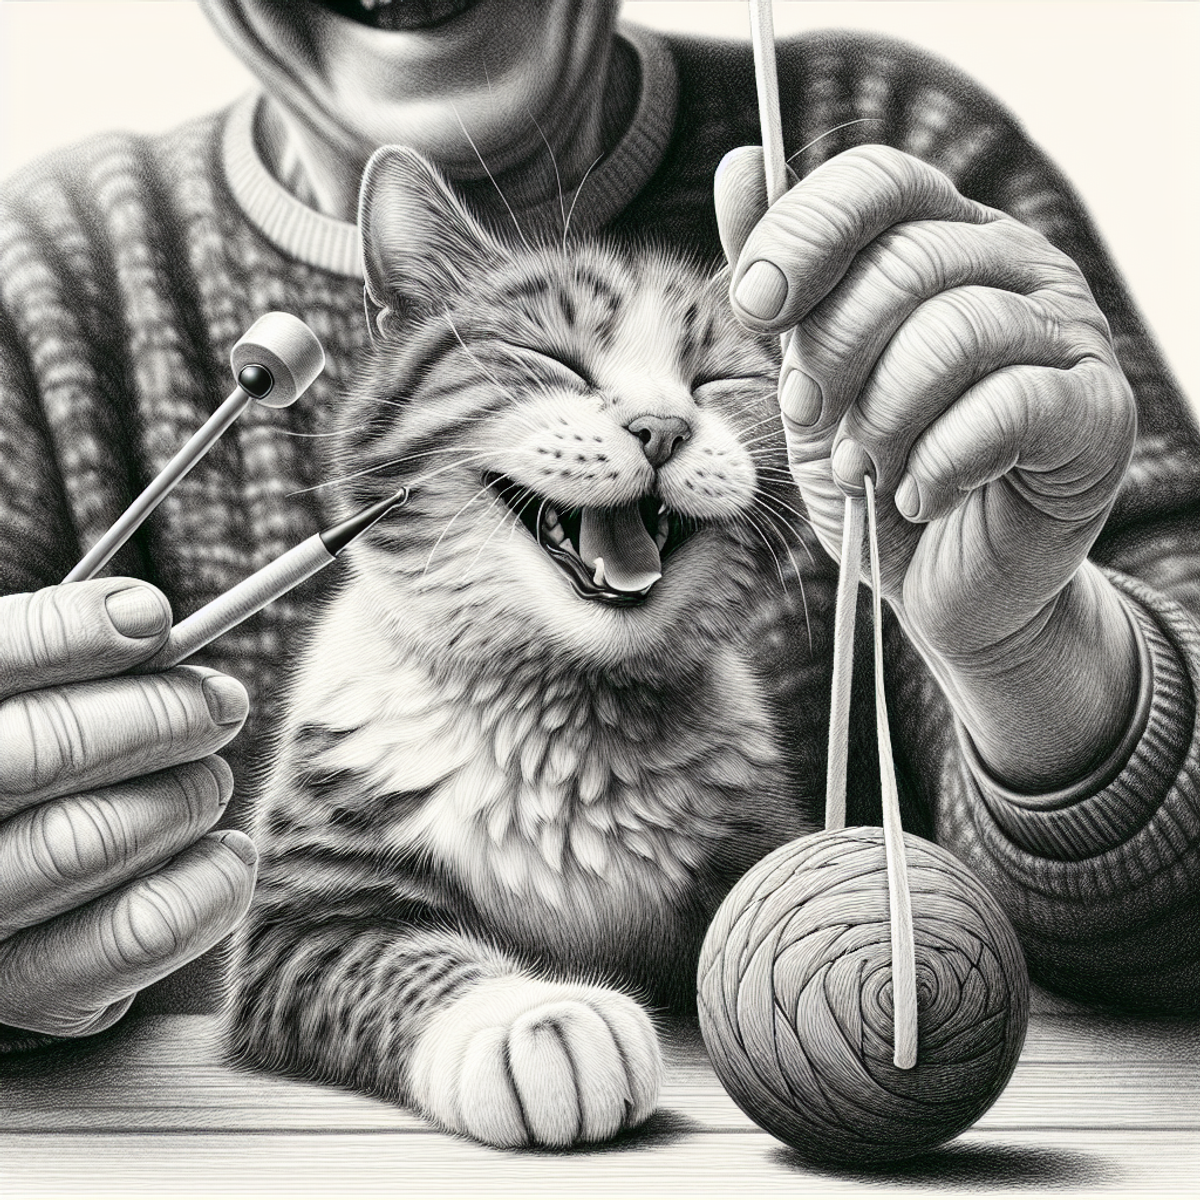 An elderly gray and white cat happily swats at a hanging string toy, with its eyes bright and tail flicking in excitement.